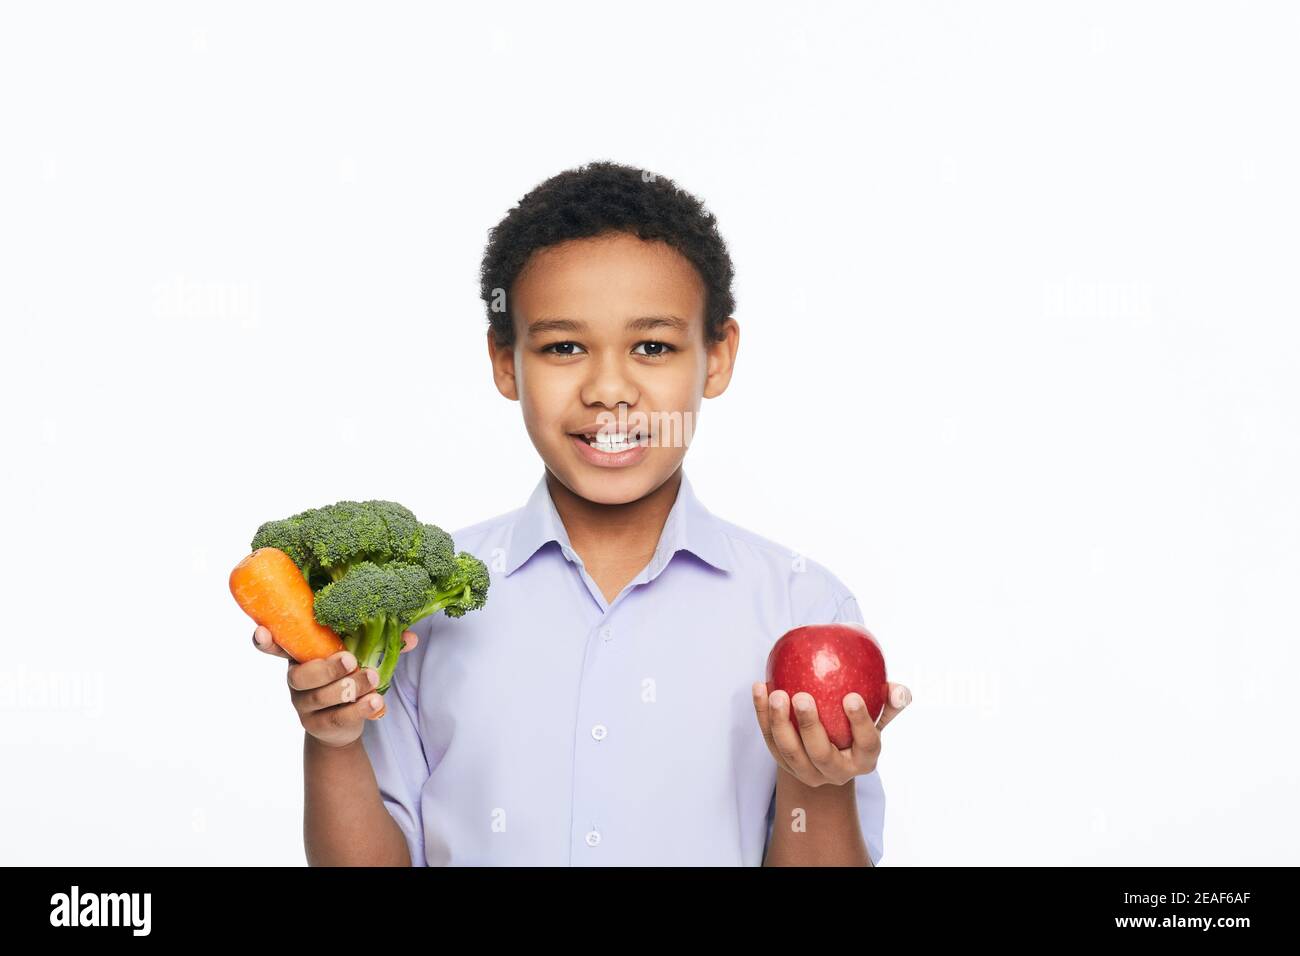 African American boy holding vegetables and fruits in his hands. healthy vegetarian food concept for kids Stock Photo